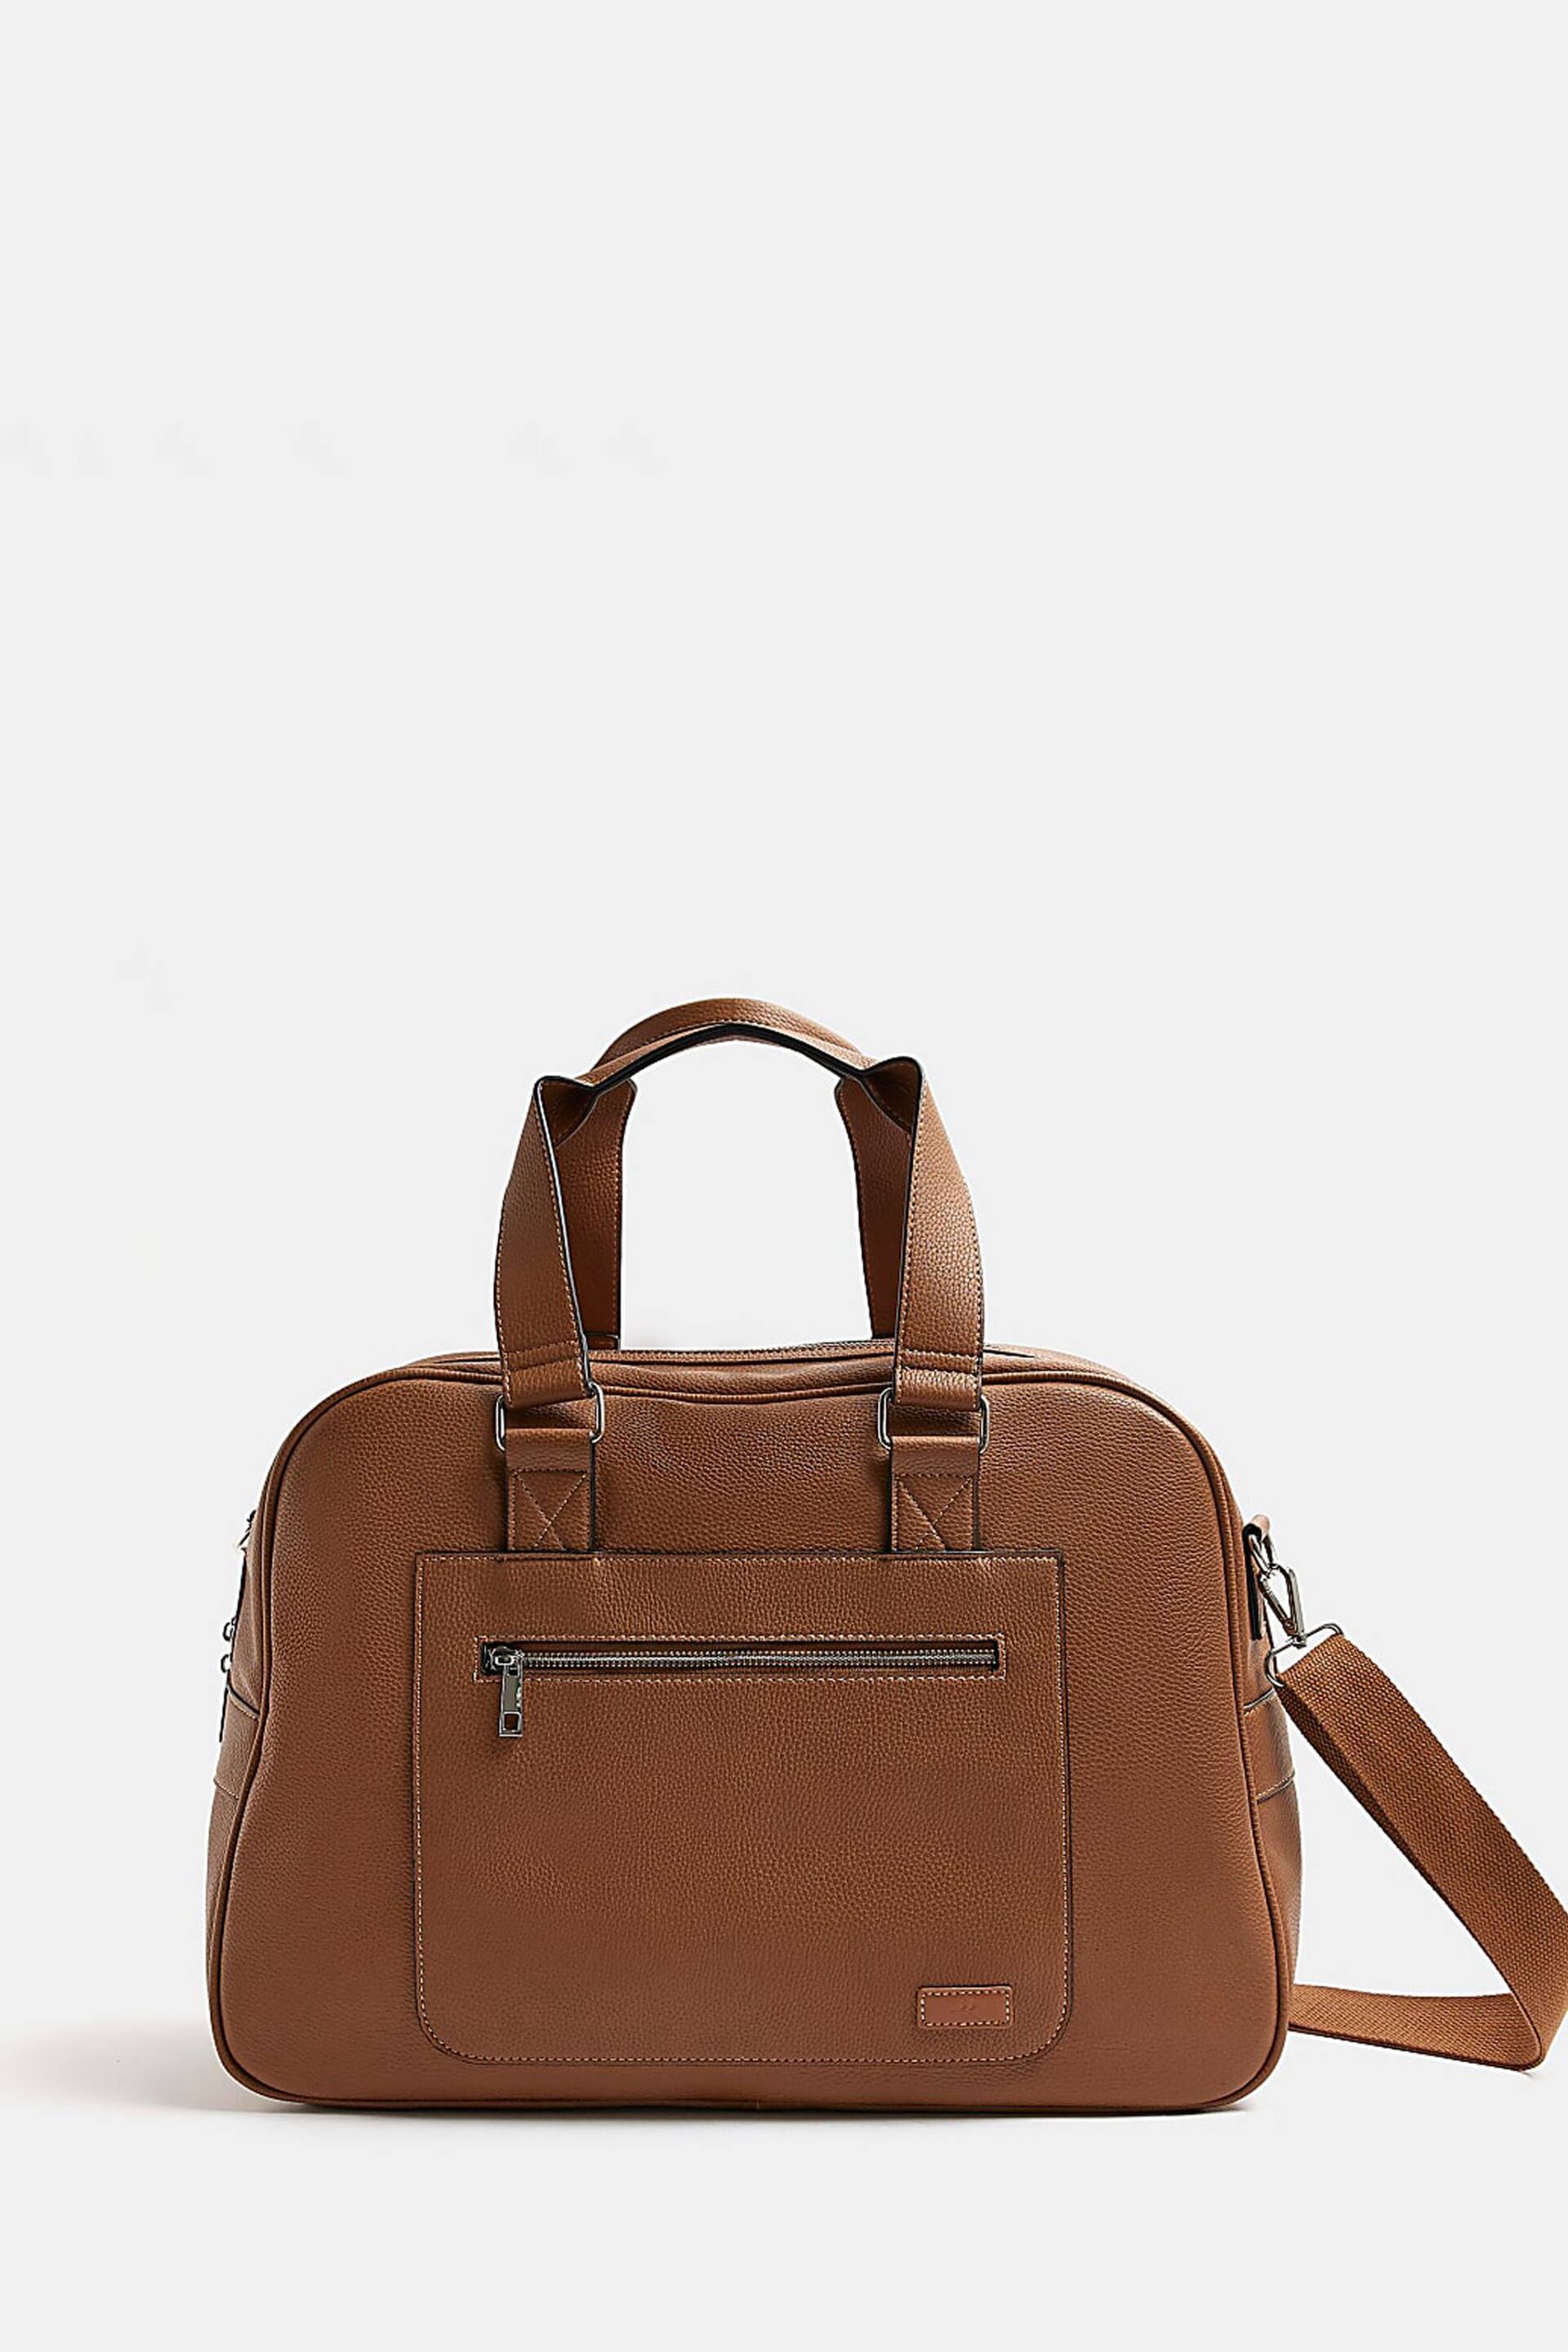 River Island Brown Light Holdall - Image 2 of 5